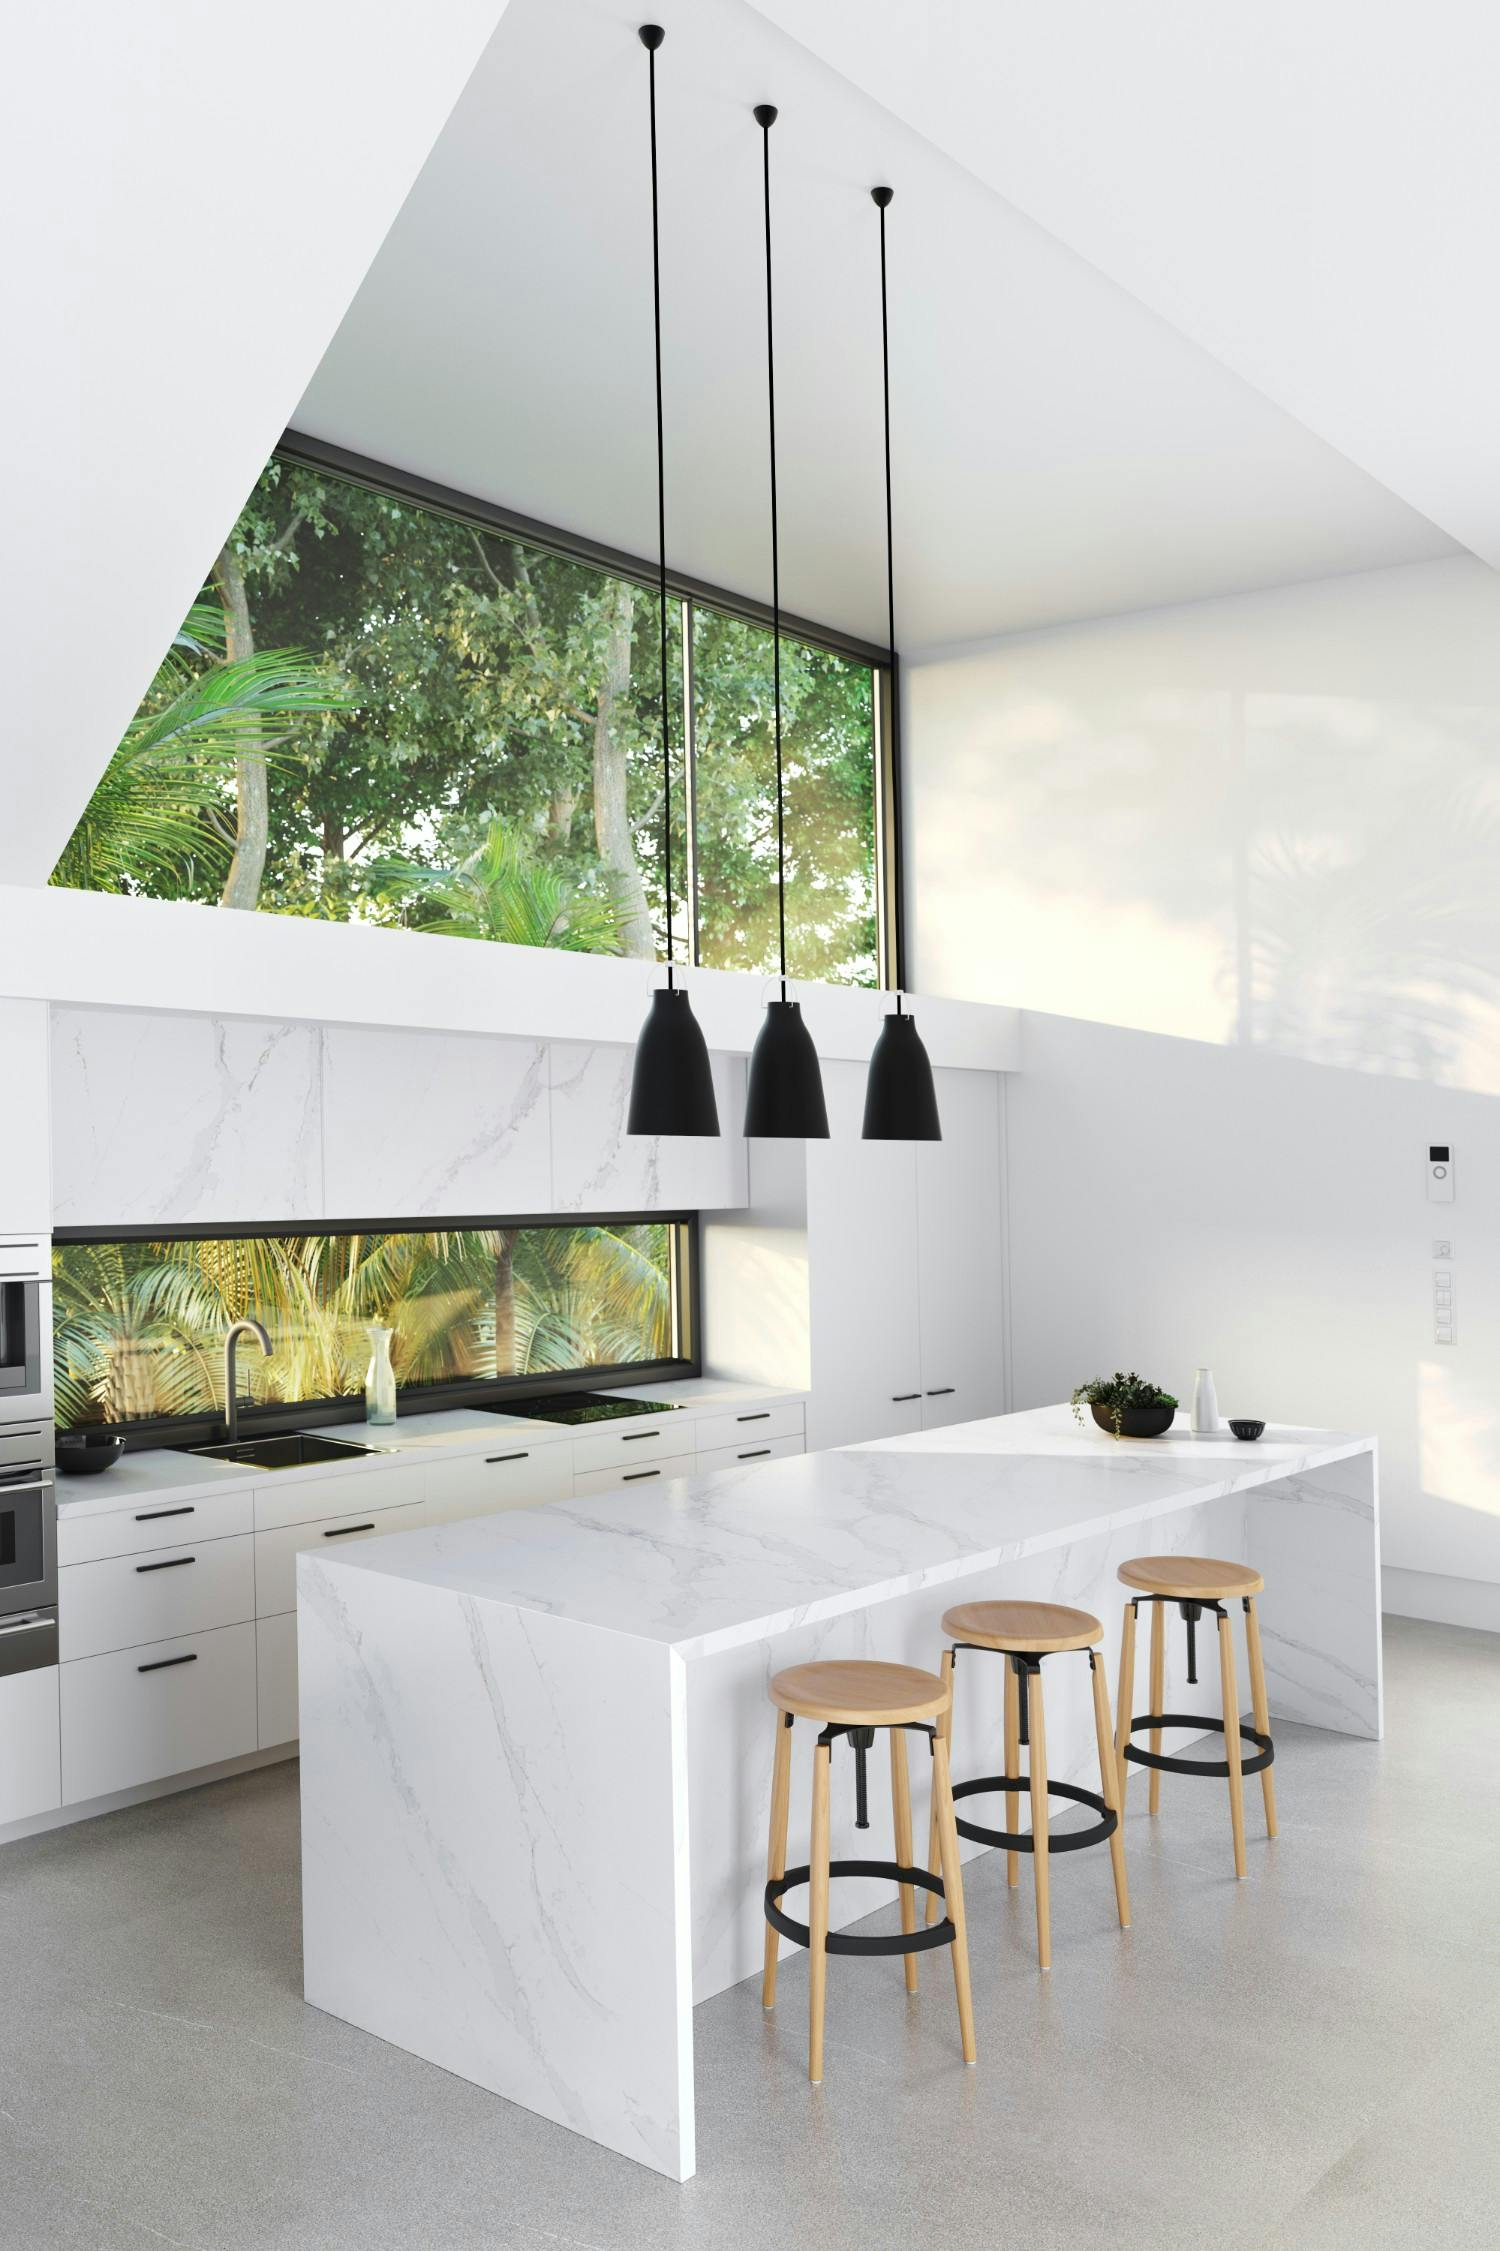 Image number 32 of the current section of 15 key elements and ideas for proper lighting in your kitchen of Cosentino USA